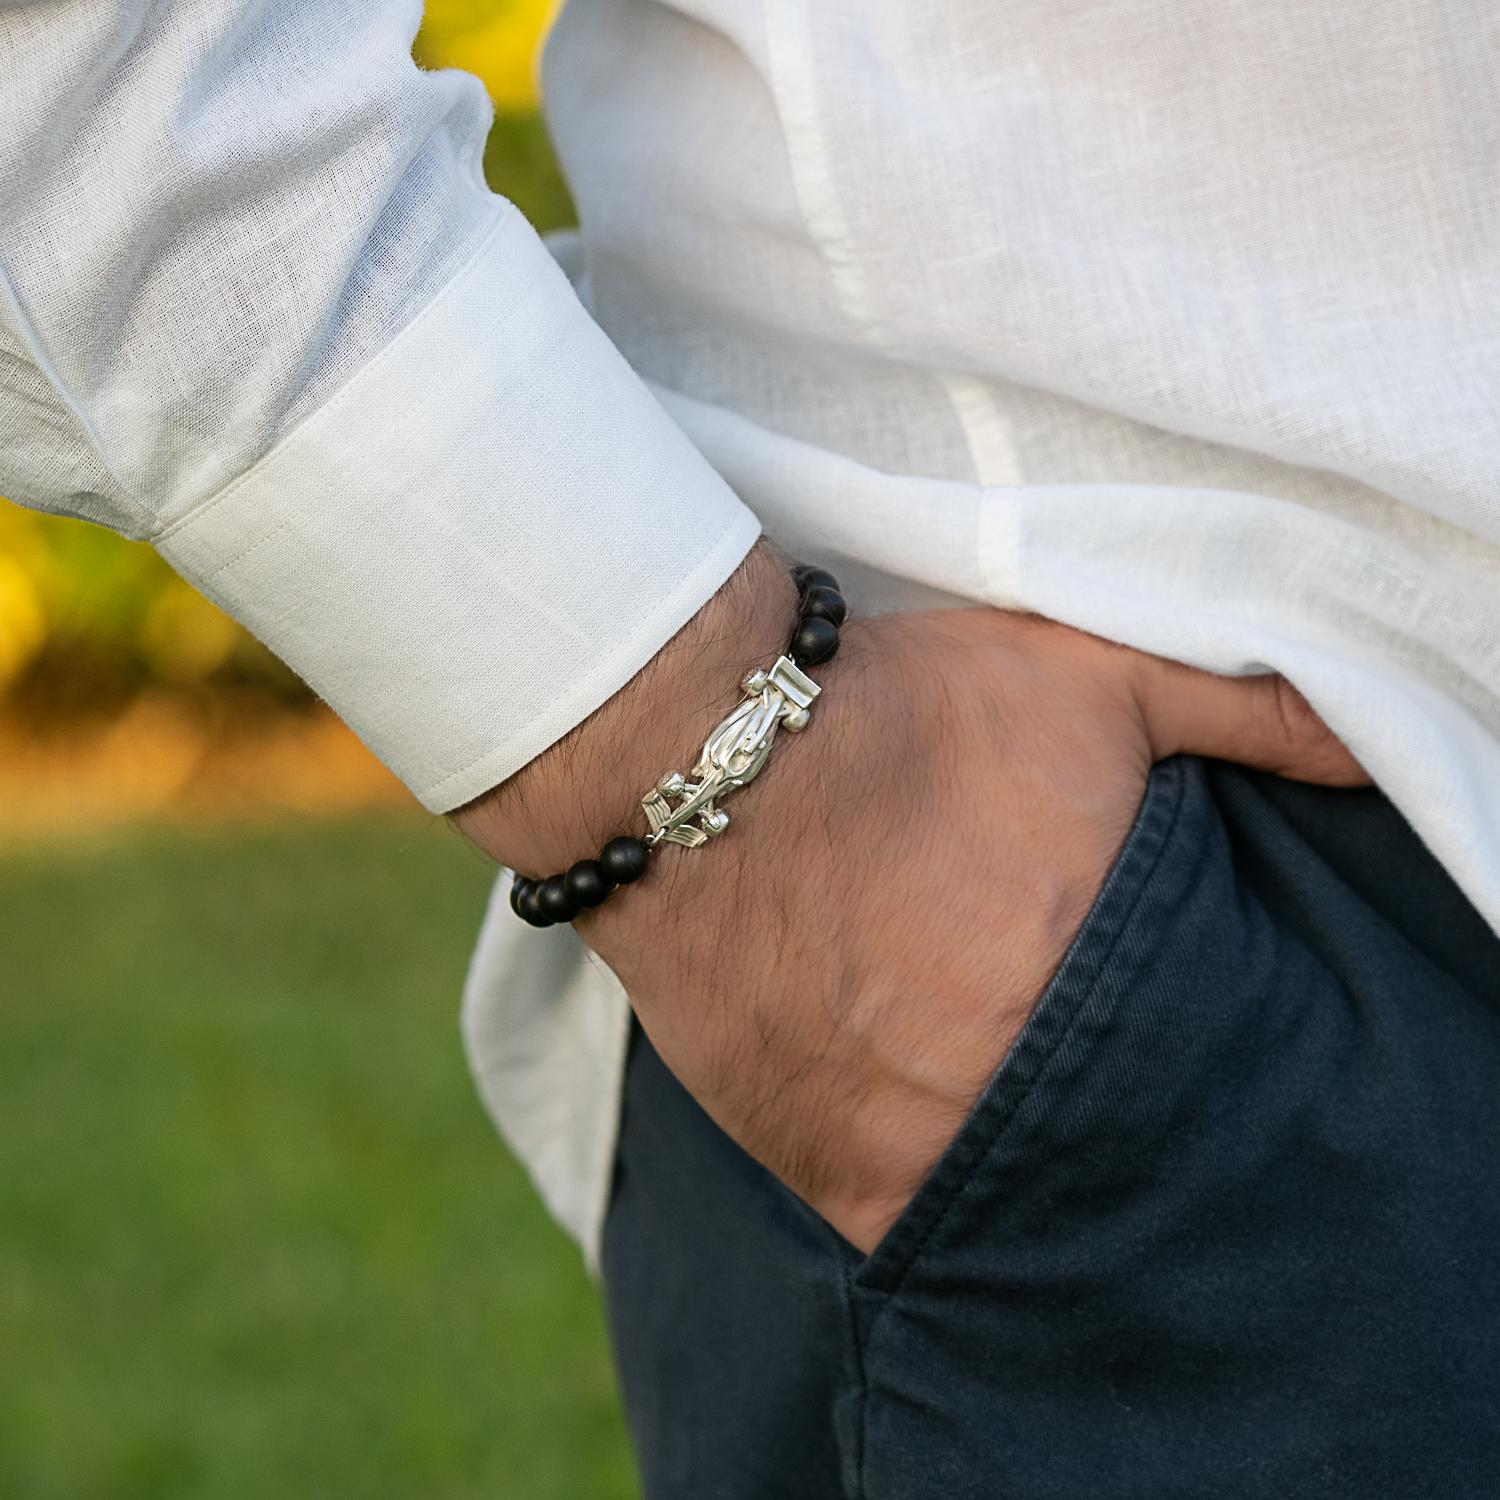 The Race Car Black Onyx Bracelet is a stunning piece that captures the essence of speed and adrenaline. Crafted from sterling silver, this bracelet features a sleek and aerodynamic race car design complete with intricate details. The streamlined